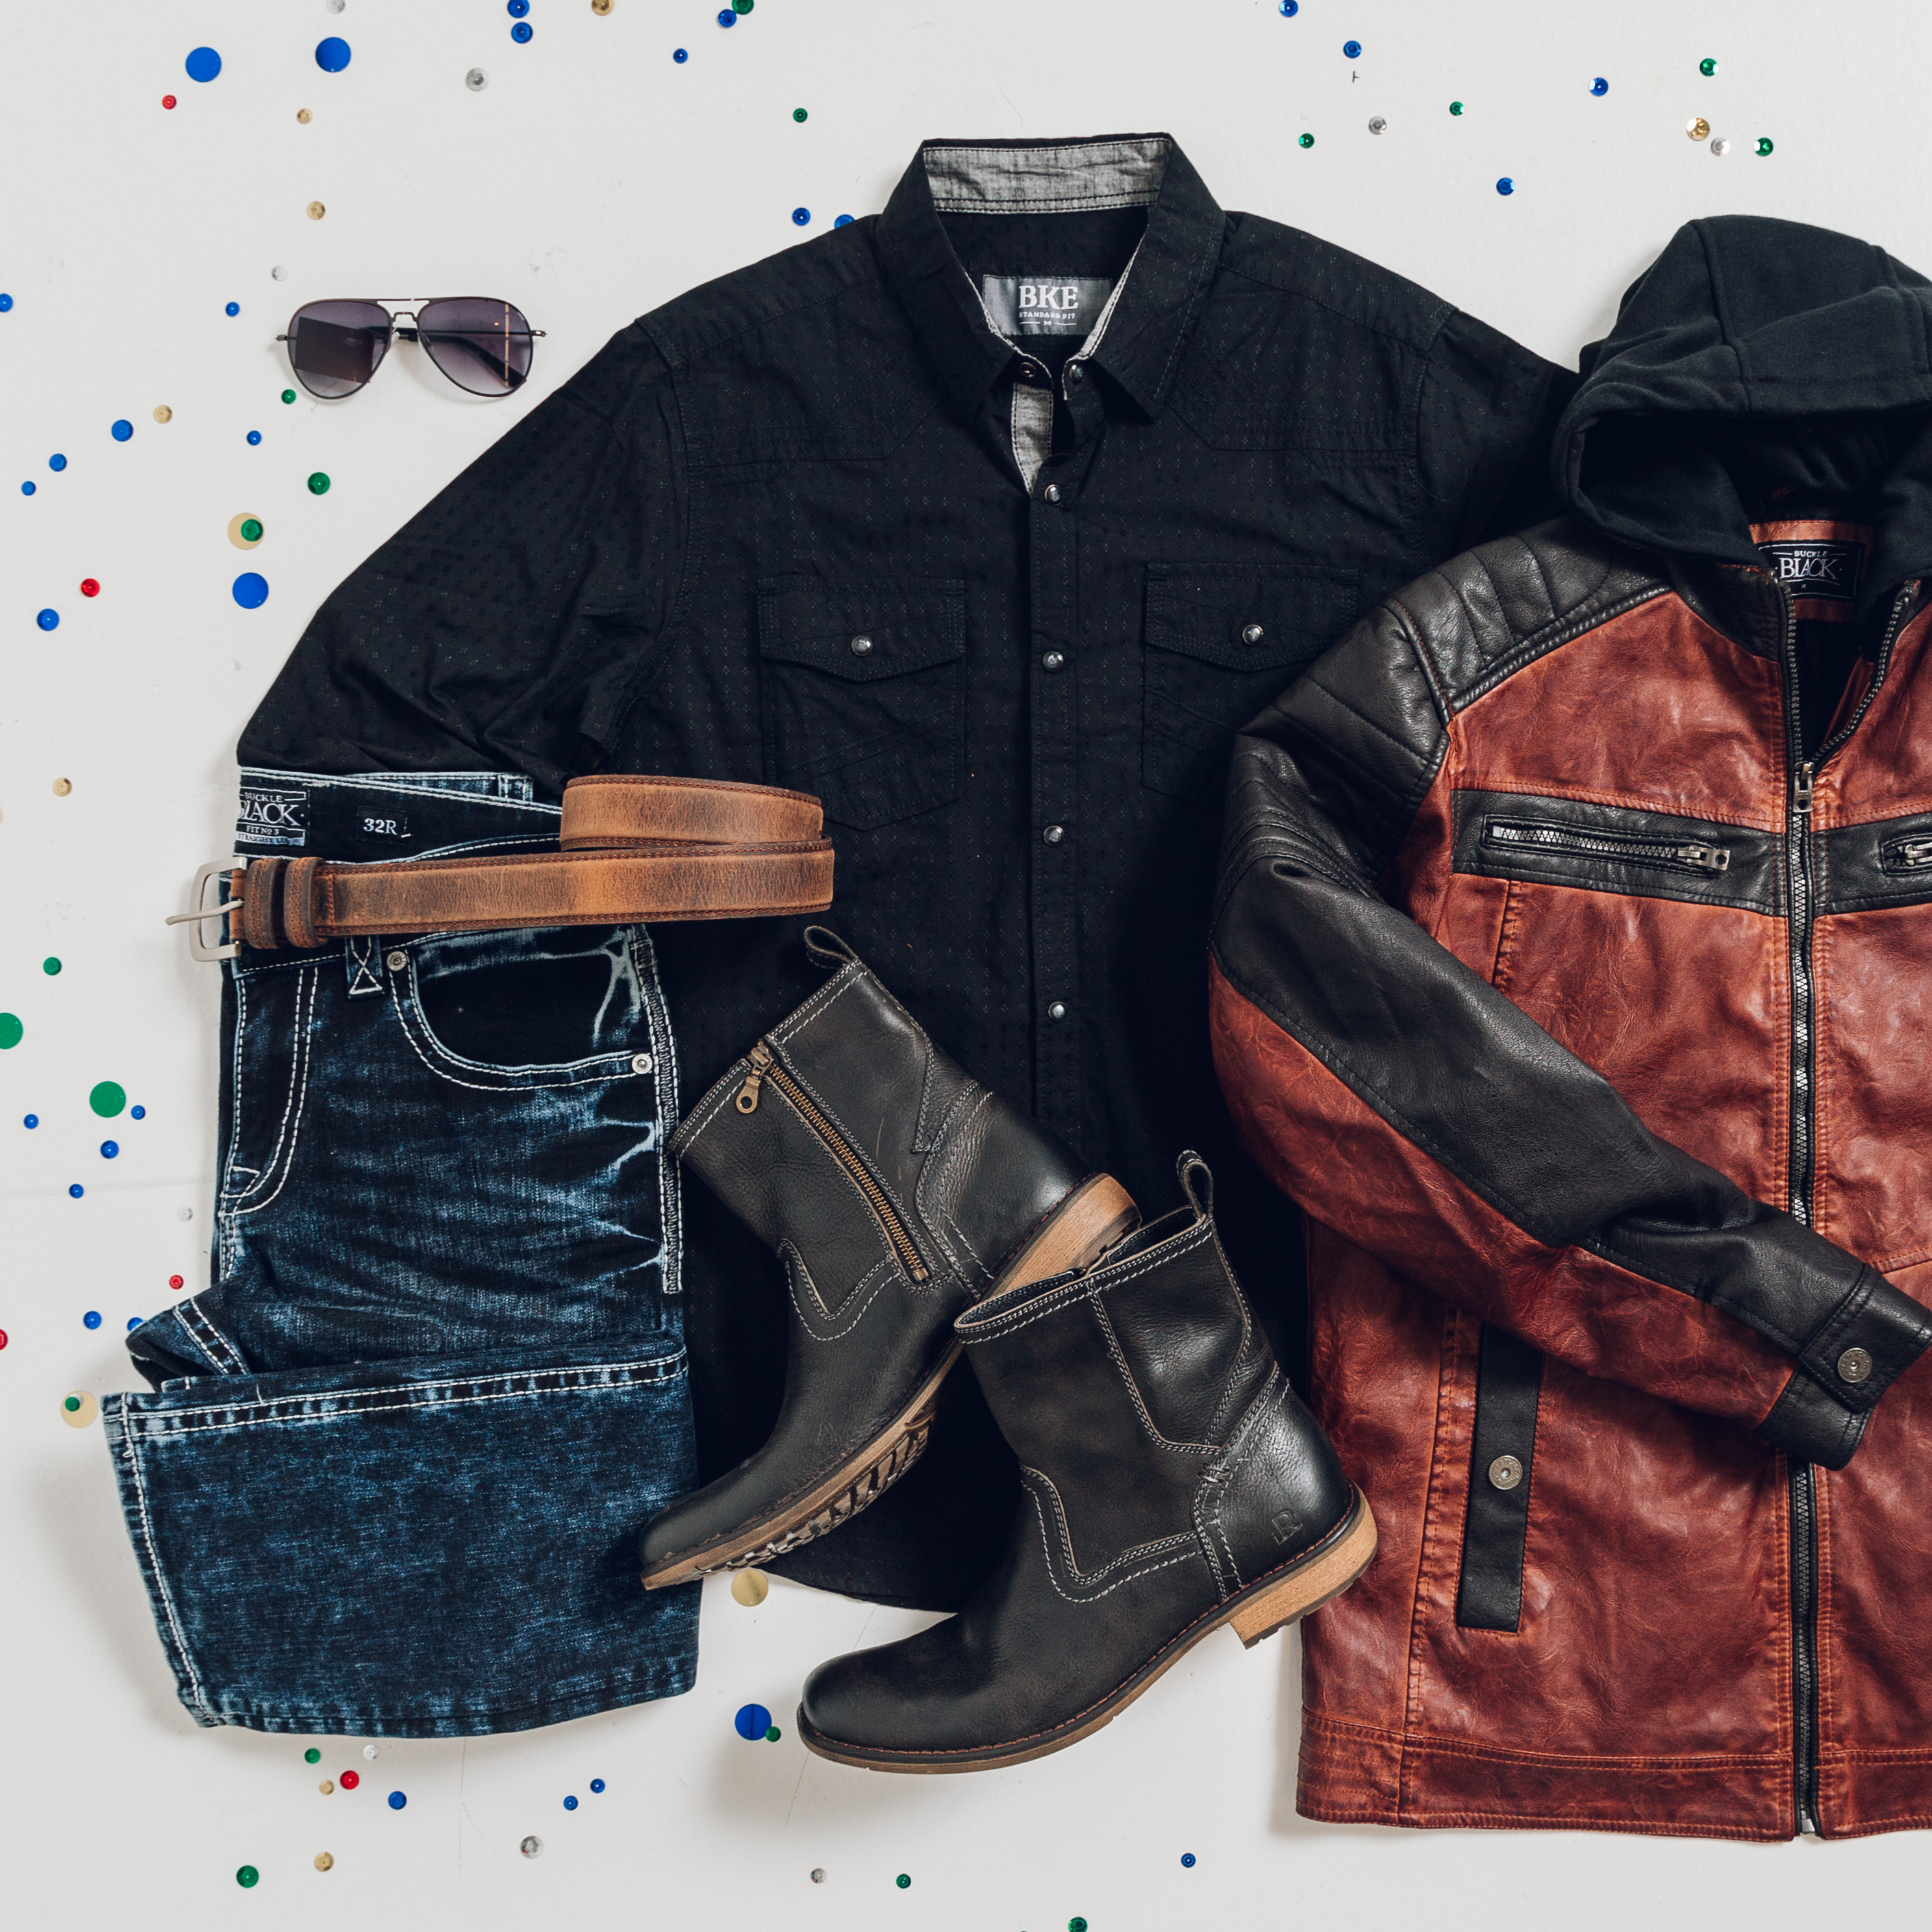 New Year's Eve Outfit Ideas For Men